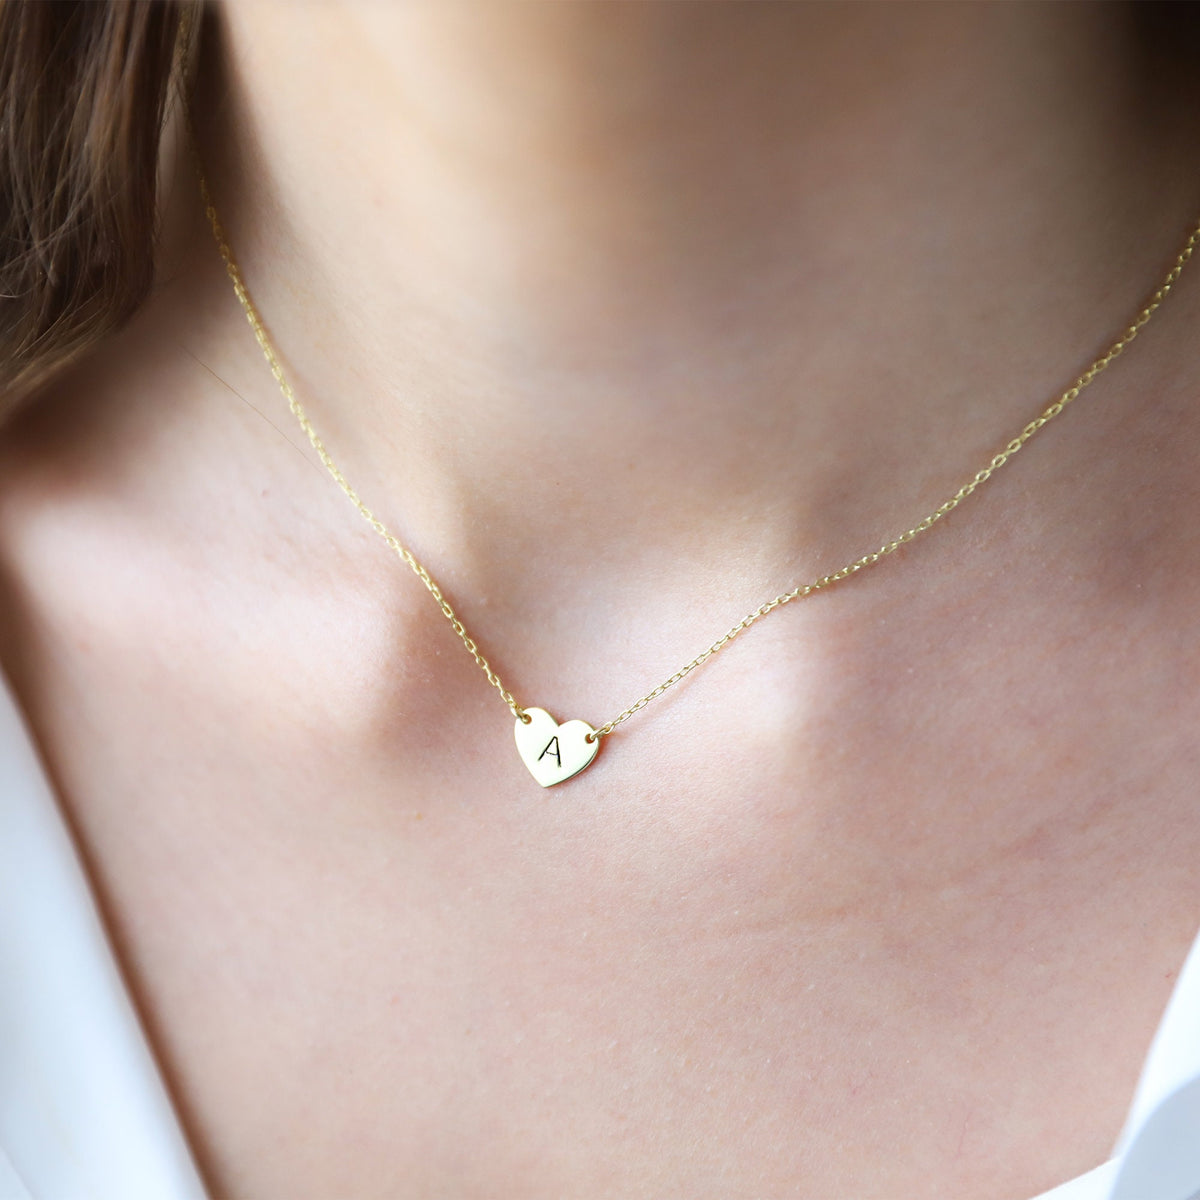 Handmade Layered Initial Heart Gold Choker Necklace, Personalized Initial Jewelry | Minimal Letter Necklace Silver